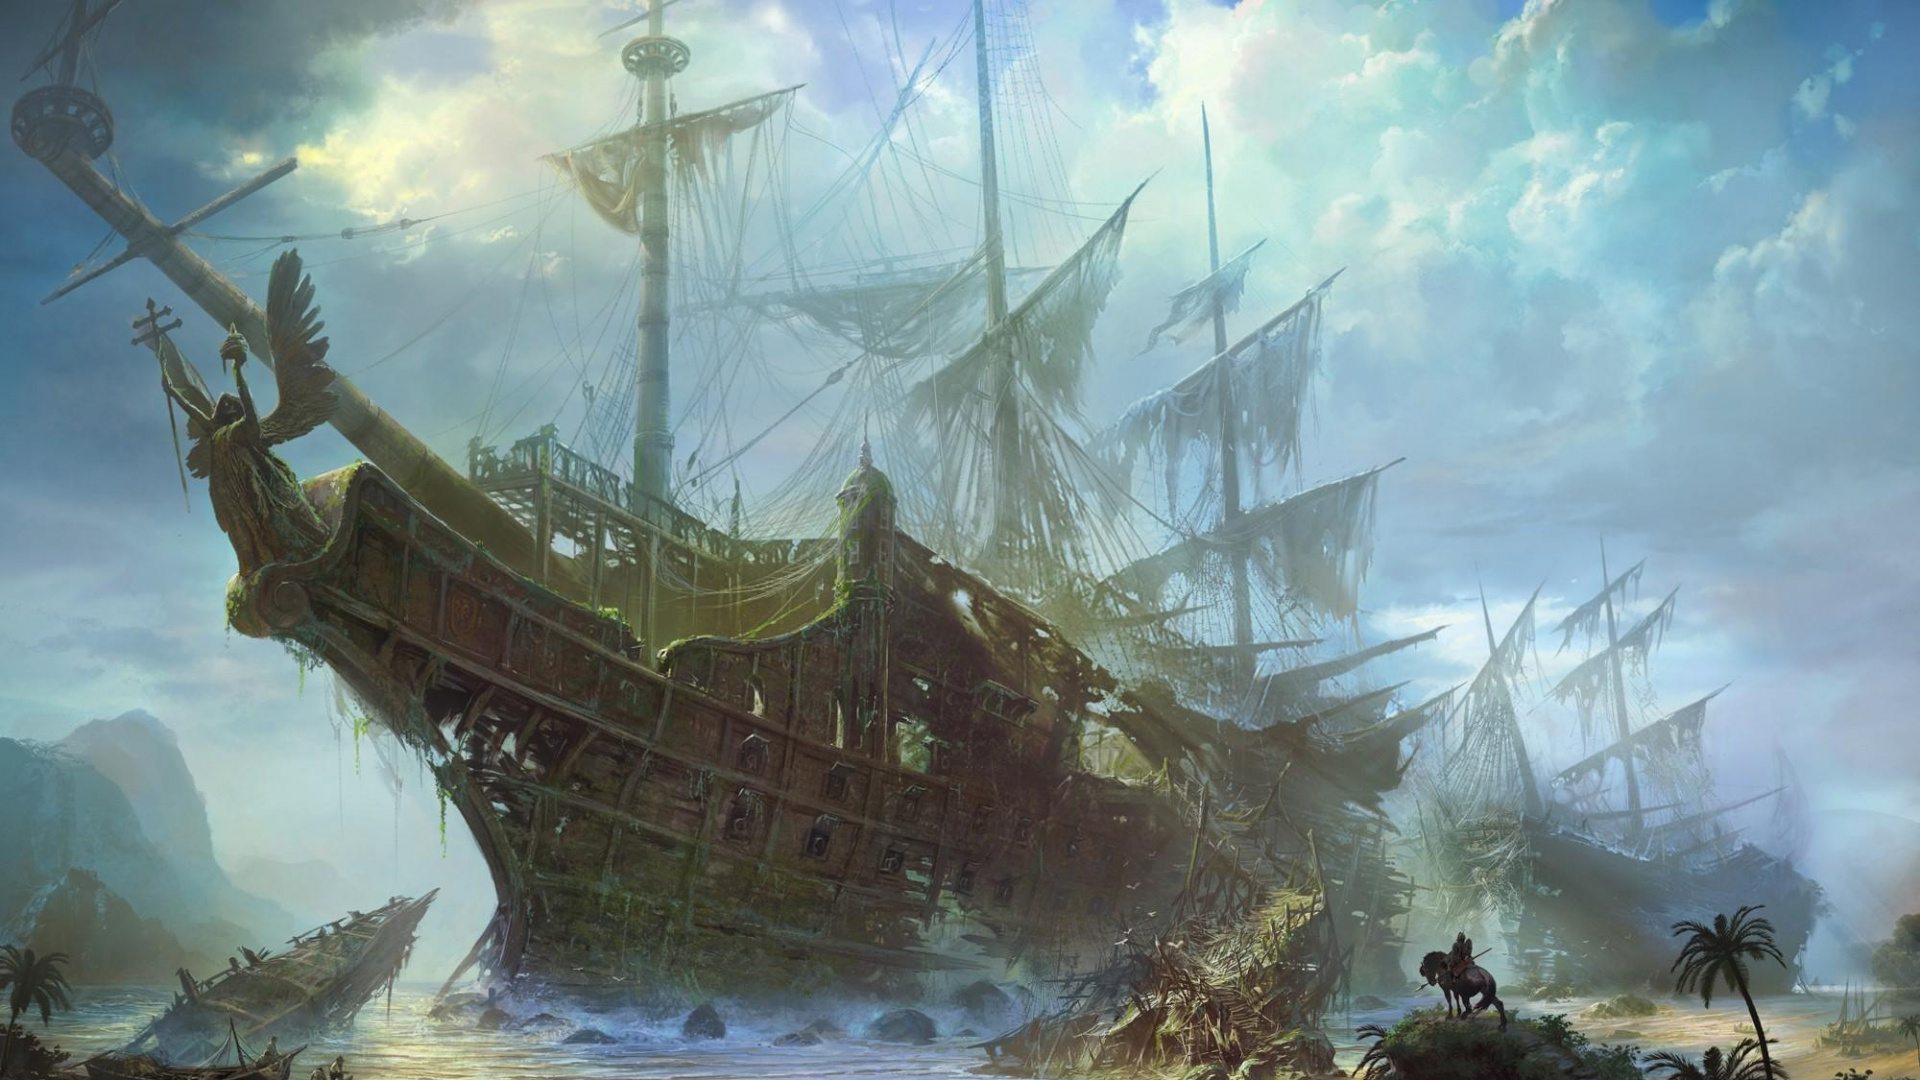 Brown and White Galleon Ship on Shore During Daytime. Wallpaper in 1920x1080 Resolution